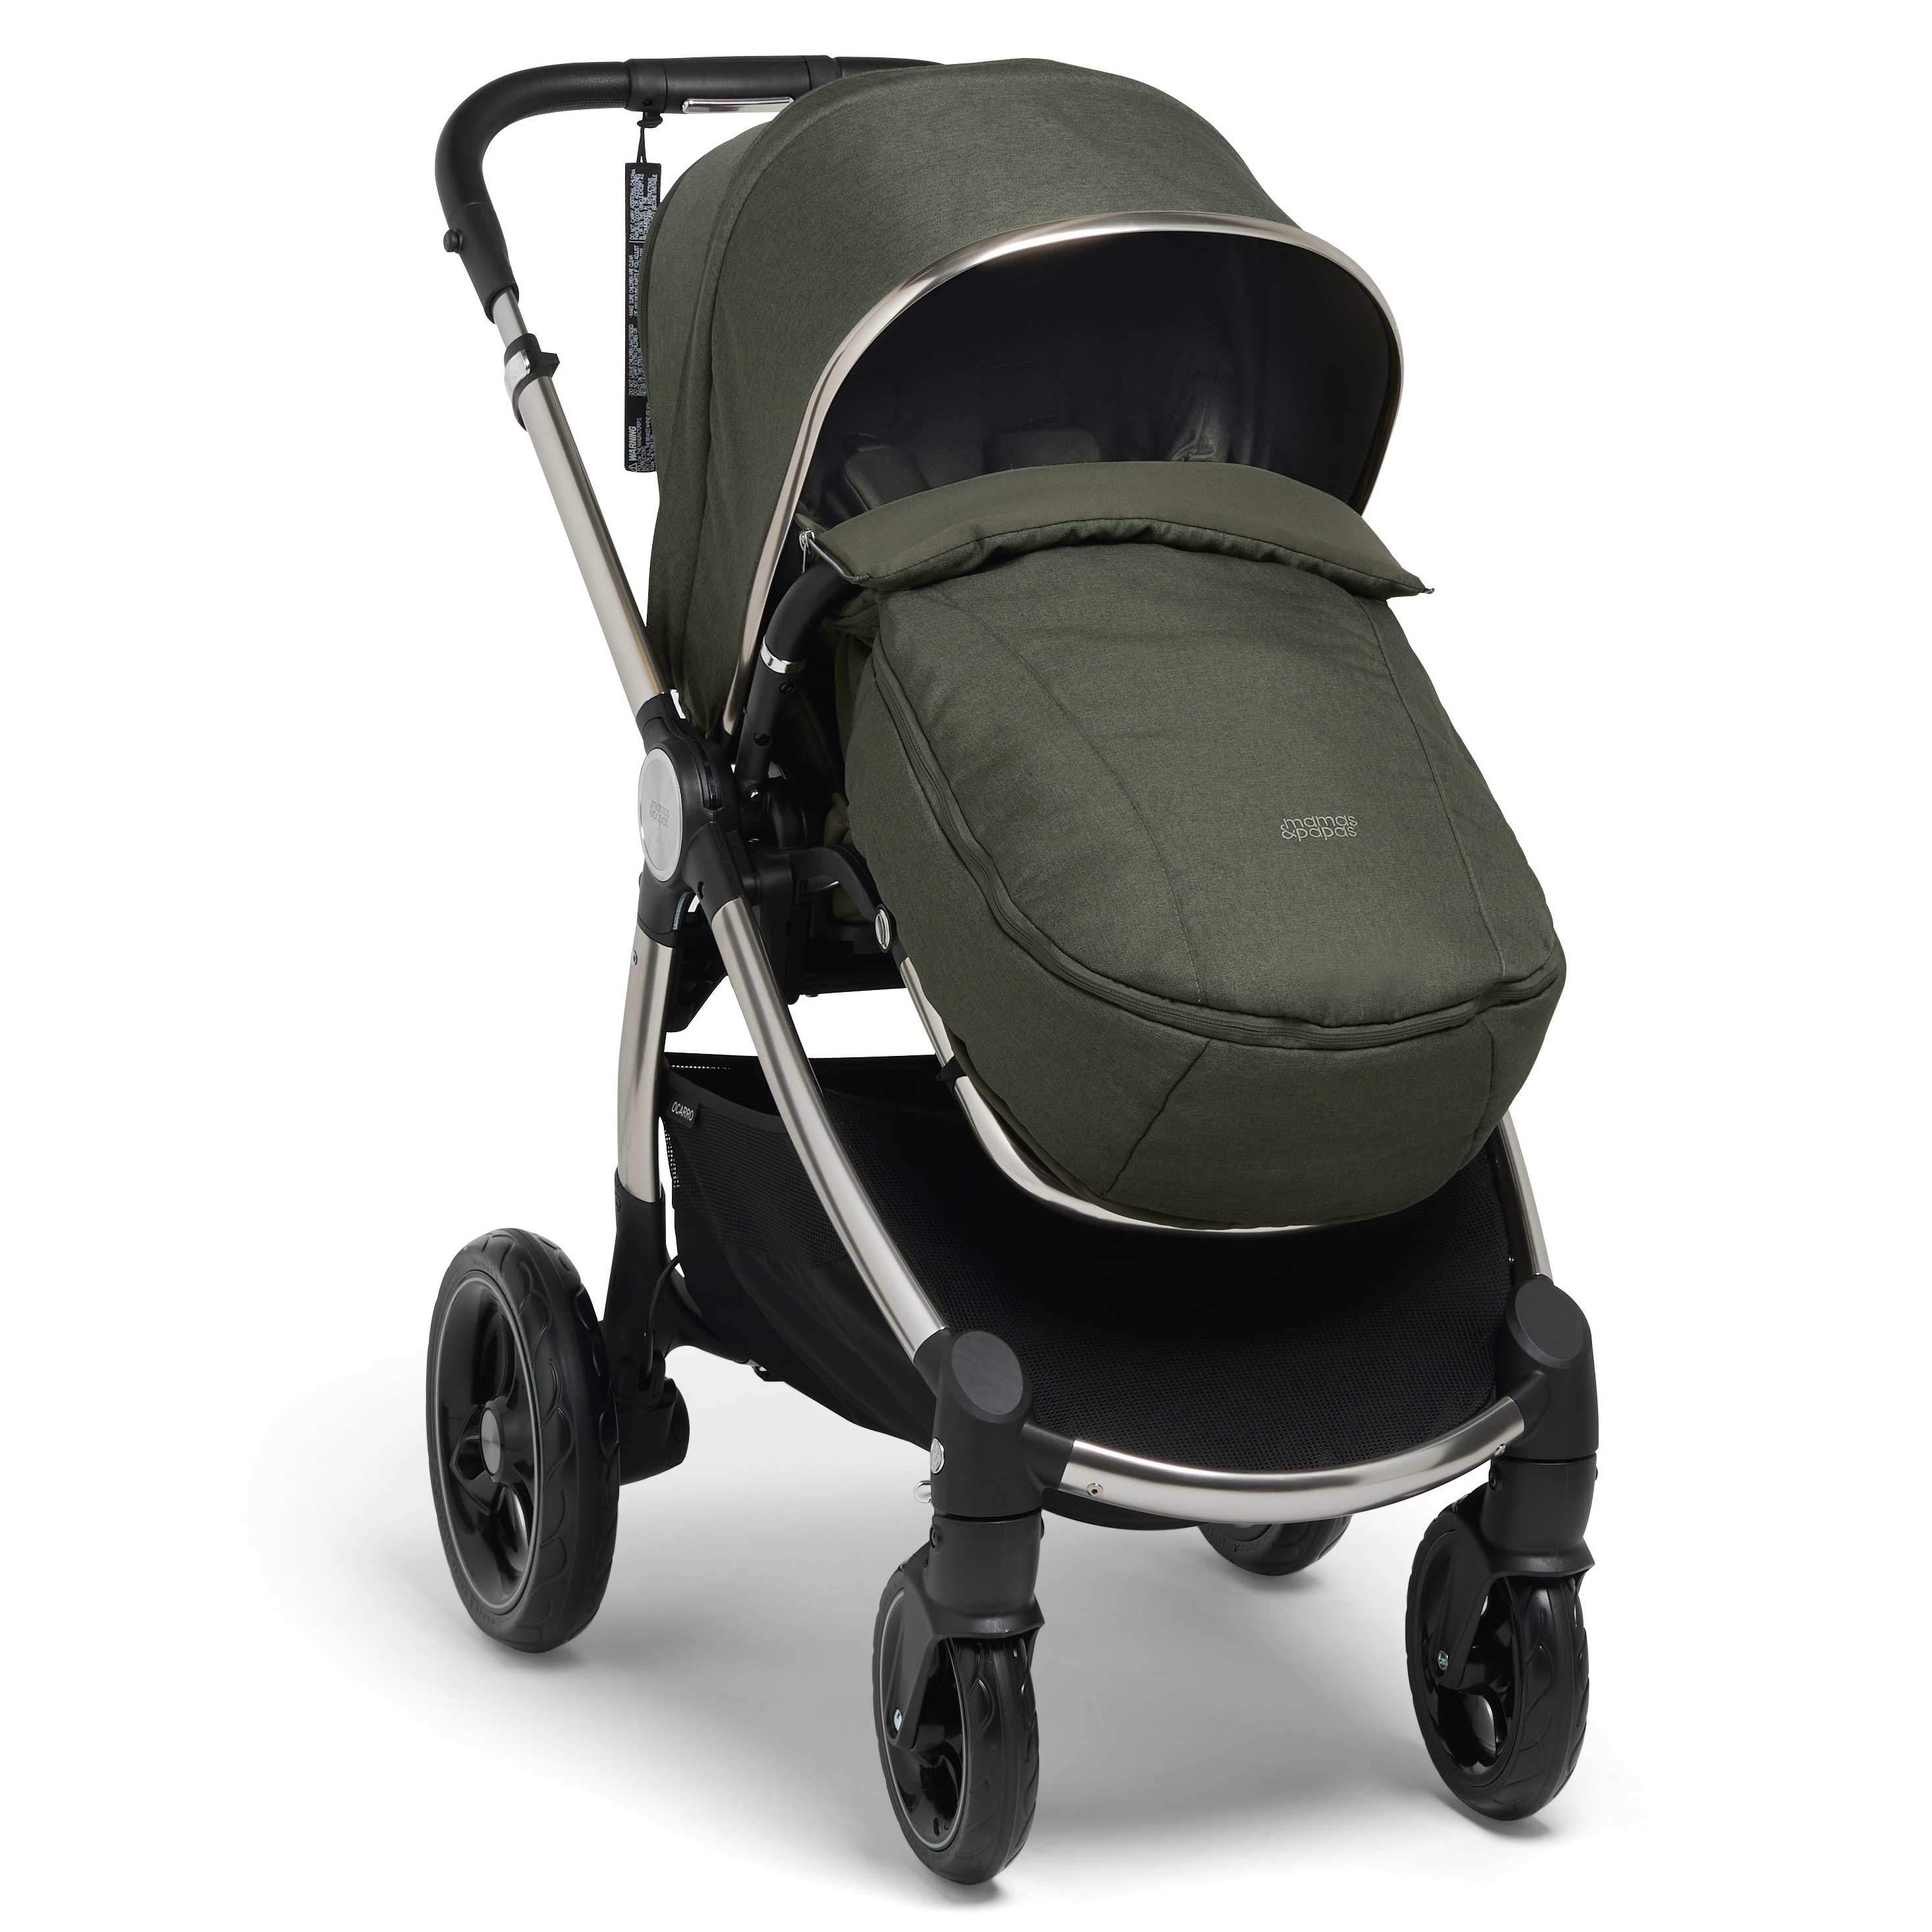 Mamas & Papas Ocarro 8 Piece Cybex Travel System in Biscuit